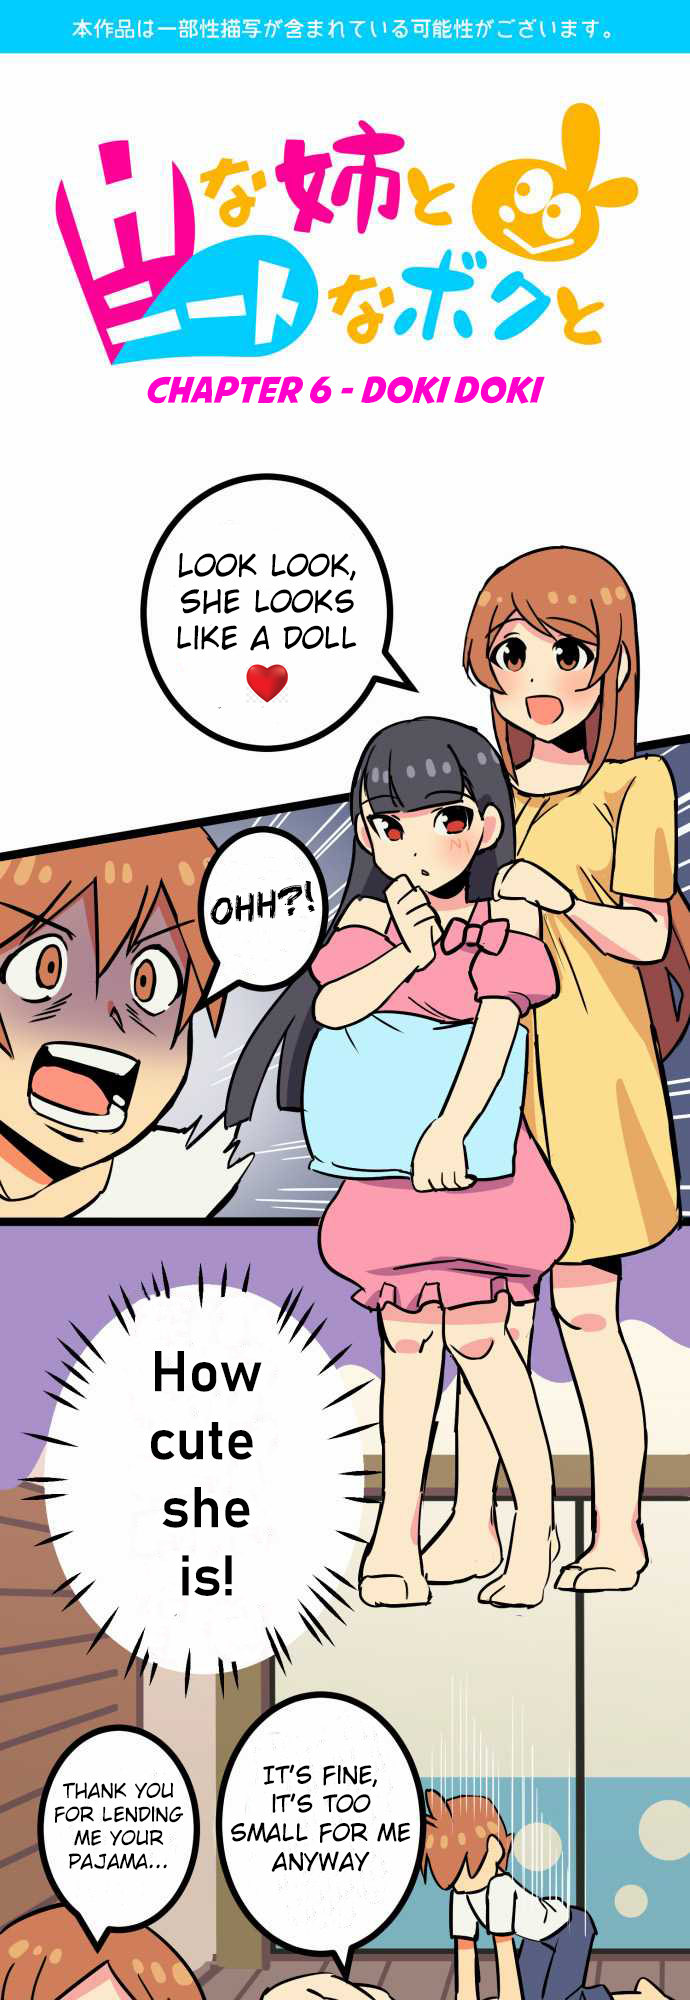 I'm a NEET and My Elder Sister is Perverted Ch. 6 Doki Doki